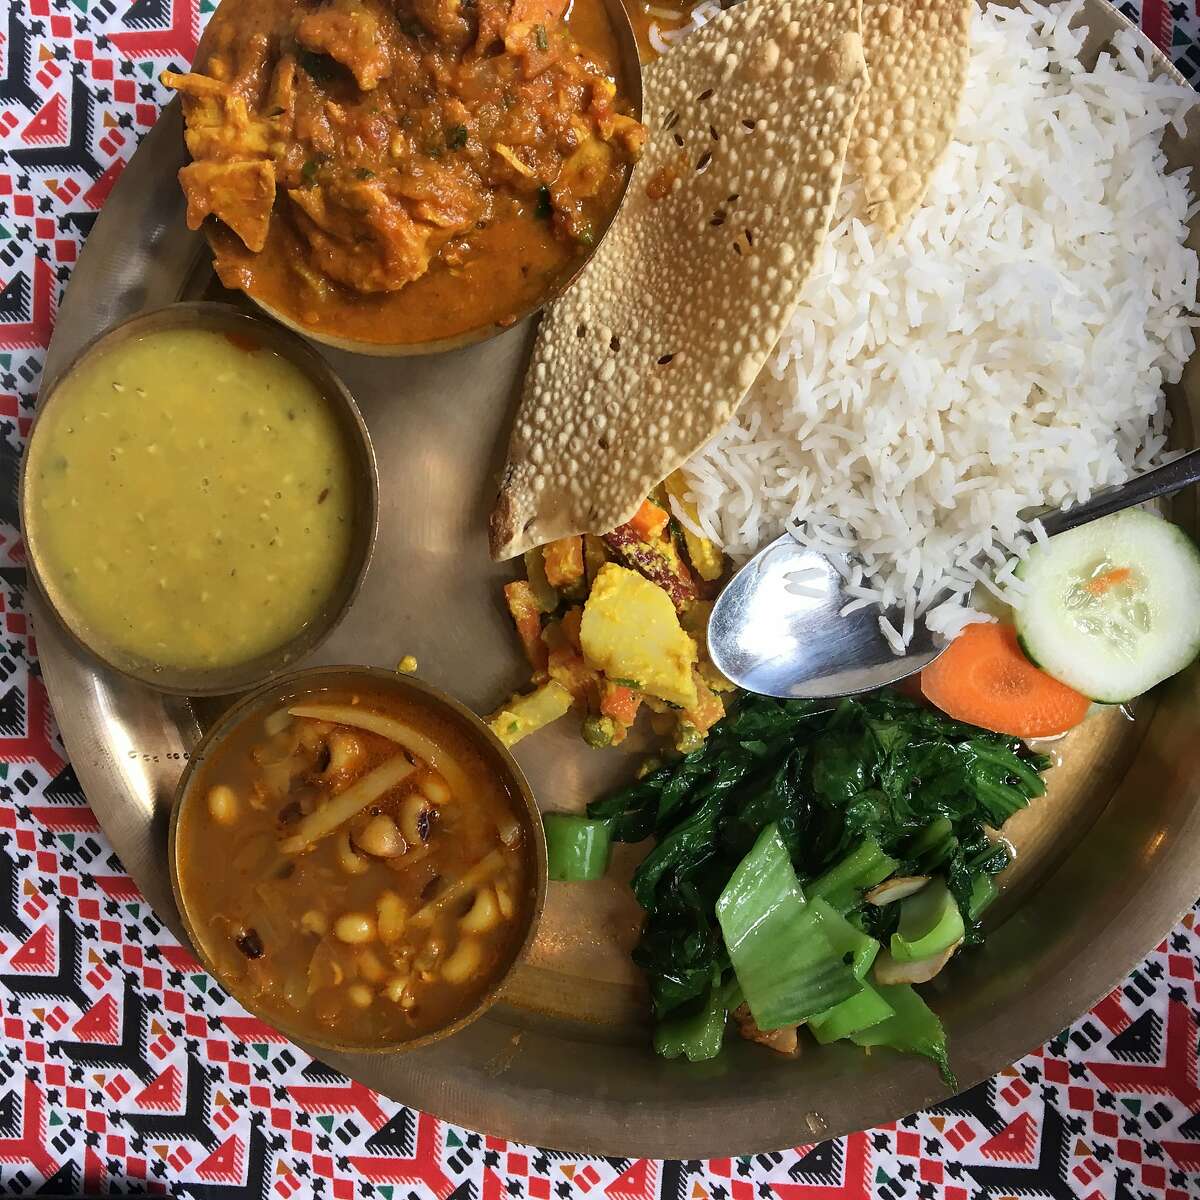 Red Chilli, a resataurant in San Francisco's Tenderloin neighborhood, serves a Nepalese thali with chicken curry, lentils, sauteed mustard greens, potatoes with bamboo shoots and black-eyed peas, and pickle.